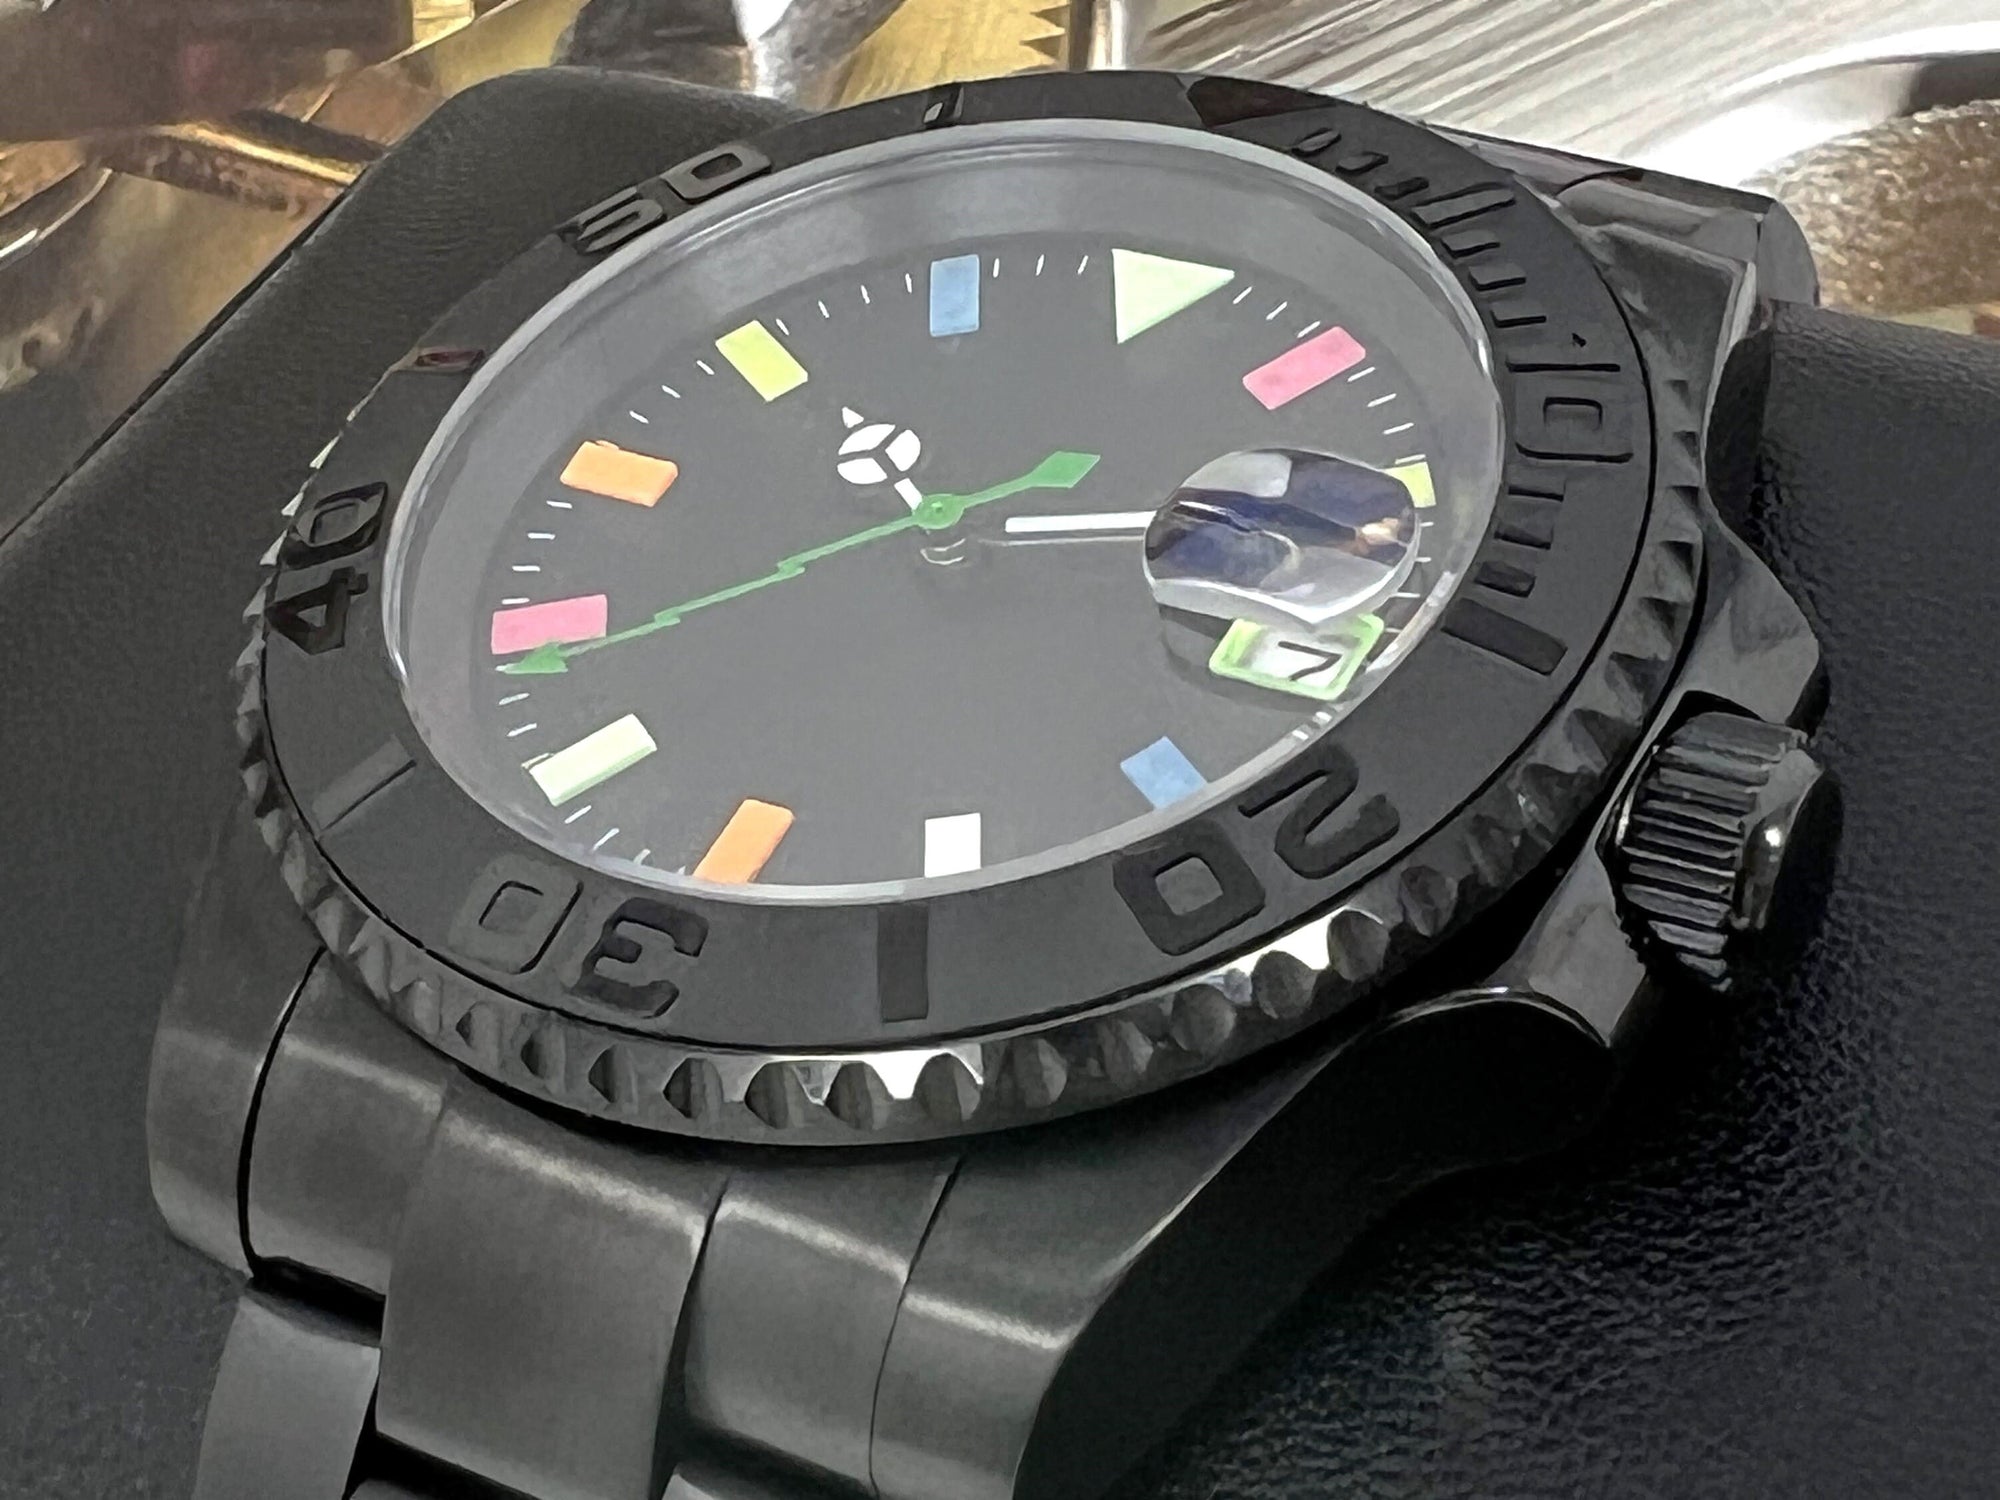 Blacked Out & Neon Glow Luxury Watch | Seiko Mod | Sapphire Crystal, Colorful Dial, Color, Watch Mod, Unique Watch, Mod Watch, Blank Dial